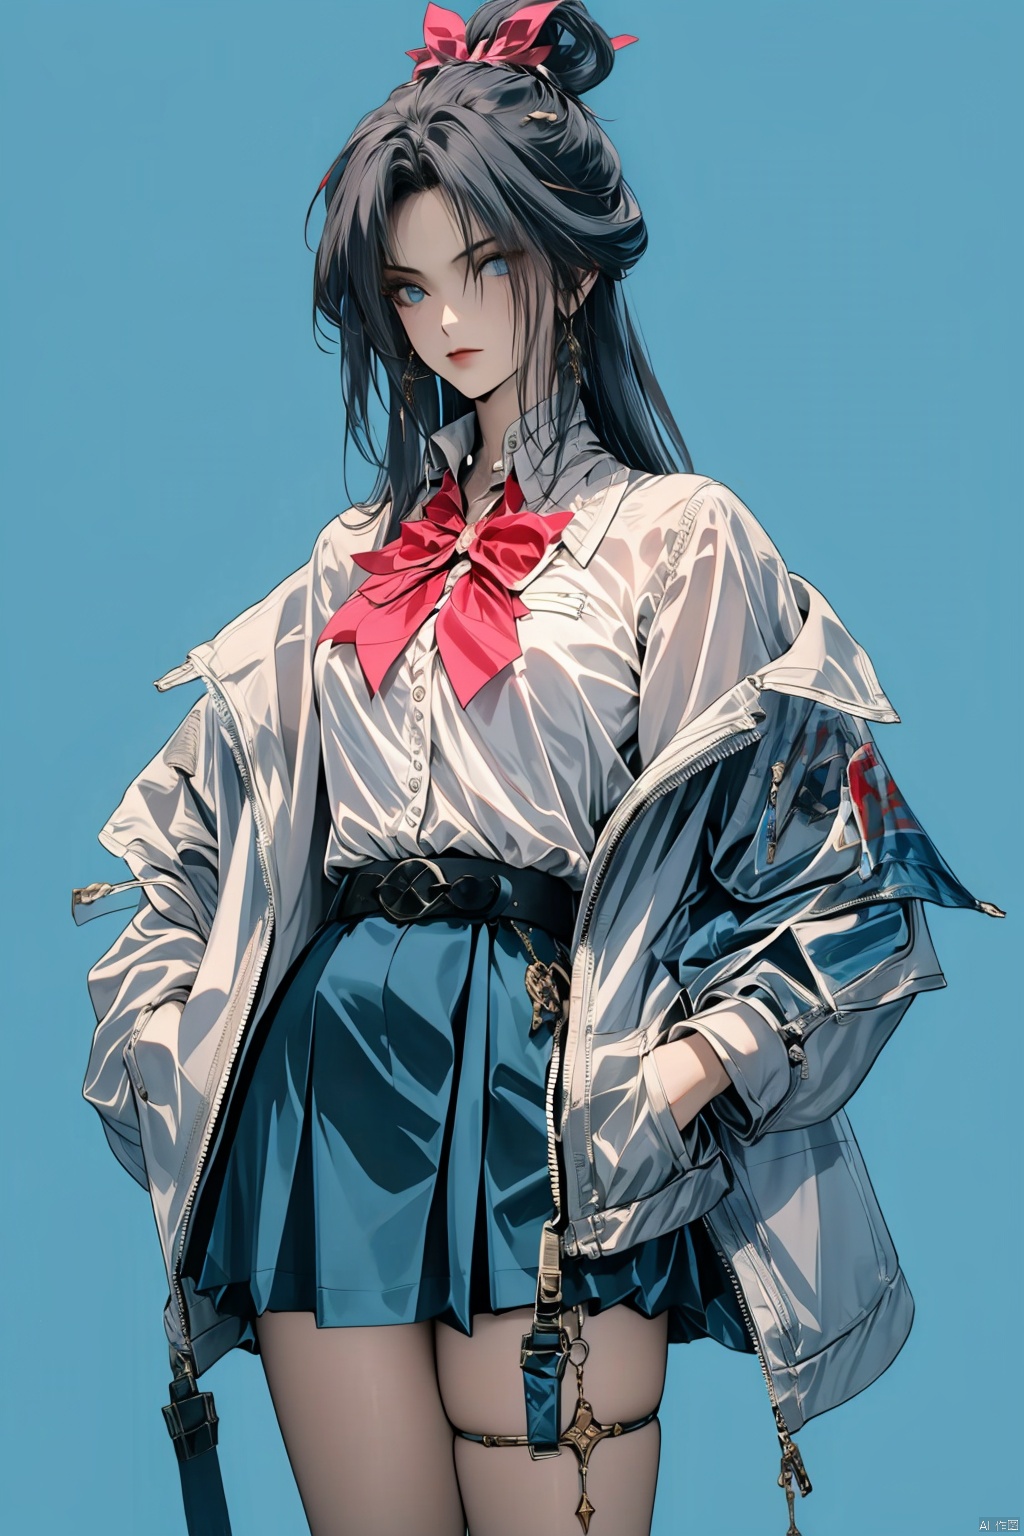  Long hair, light blue hair, pink streaks of hair, space bun hairstyle, flower hairpin, blue eyes, long-sleeve, button-up white shirt, a gray jacket with blue-green stripes, a red bow, dark blue-green pleated skirt, school background, add_detail:1, add_detail:0, add_detail:0.5